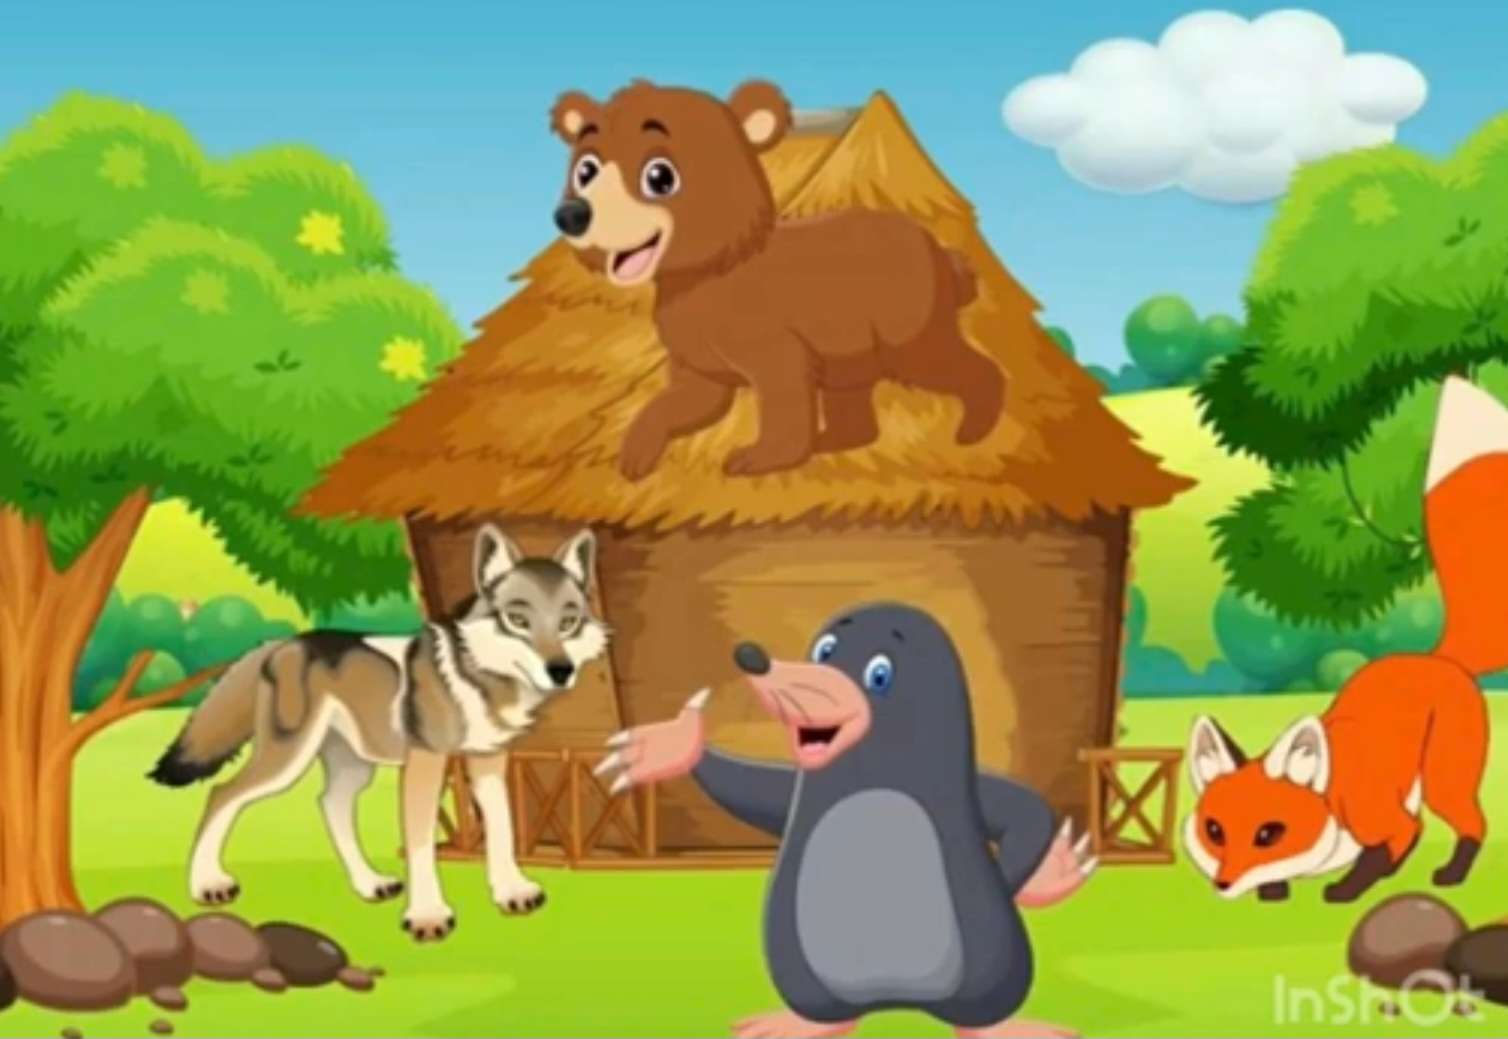 Little house without doors jigsaw puzzle online